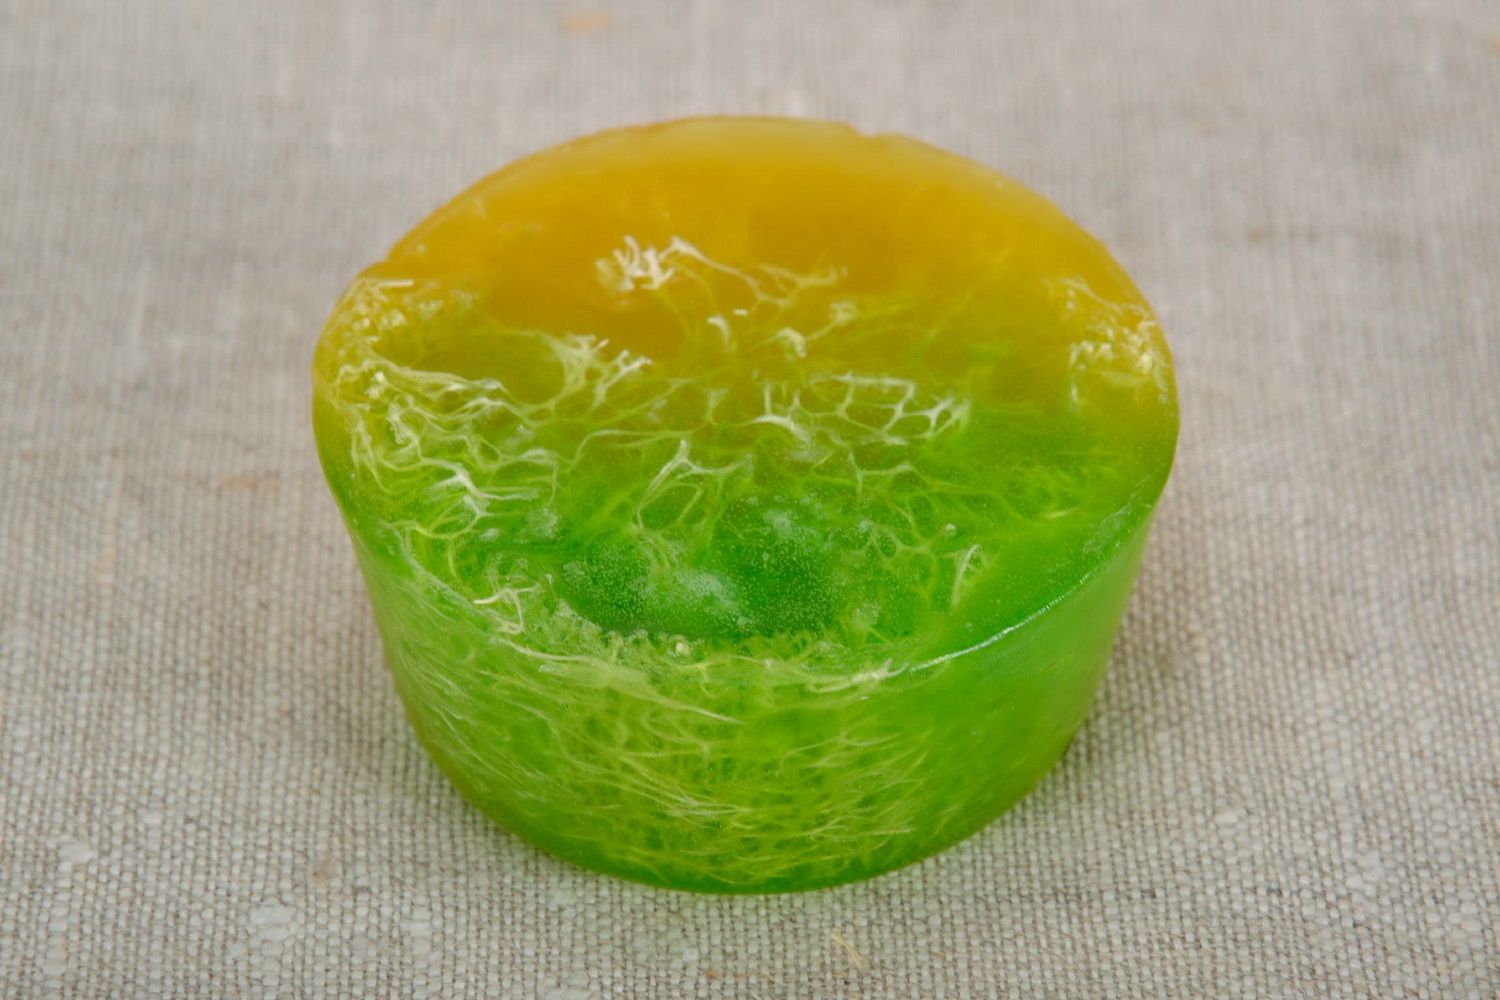 Soap with shower puff inside photo 3